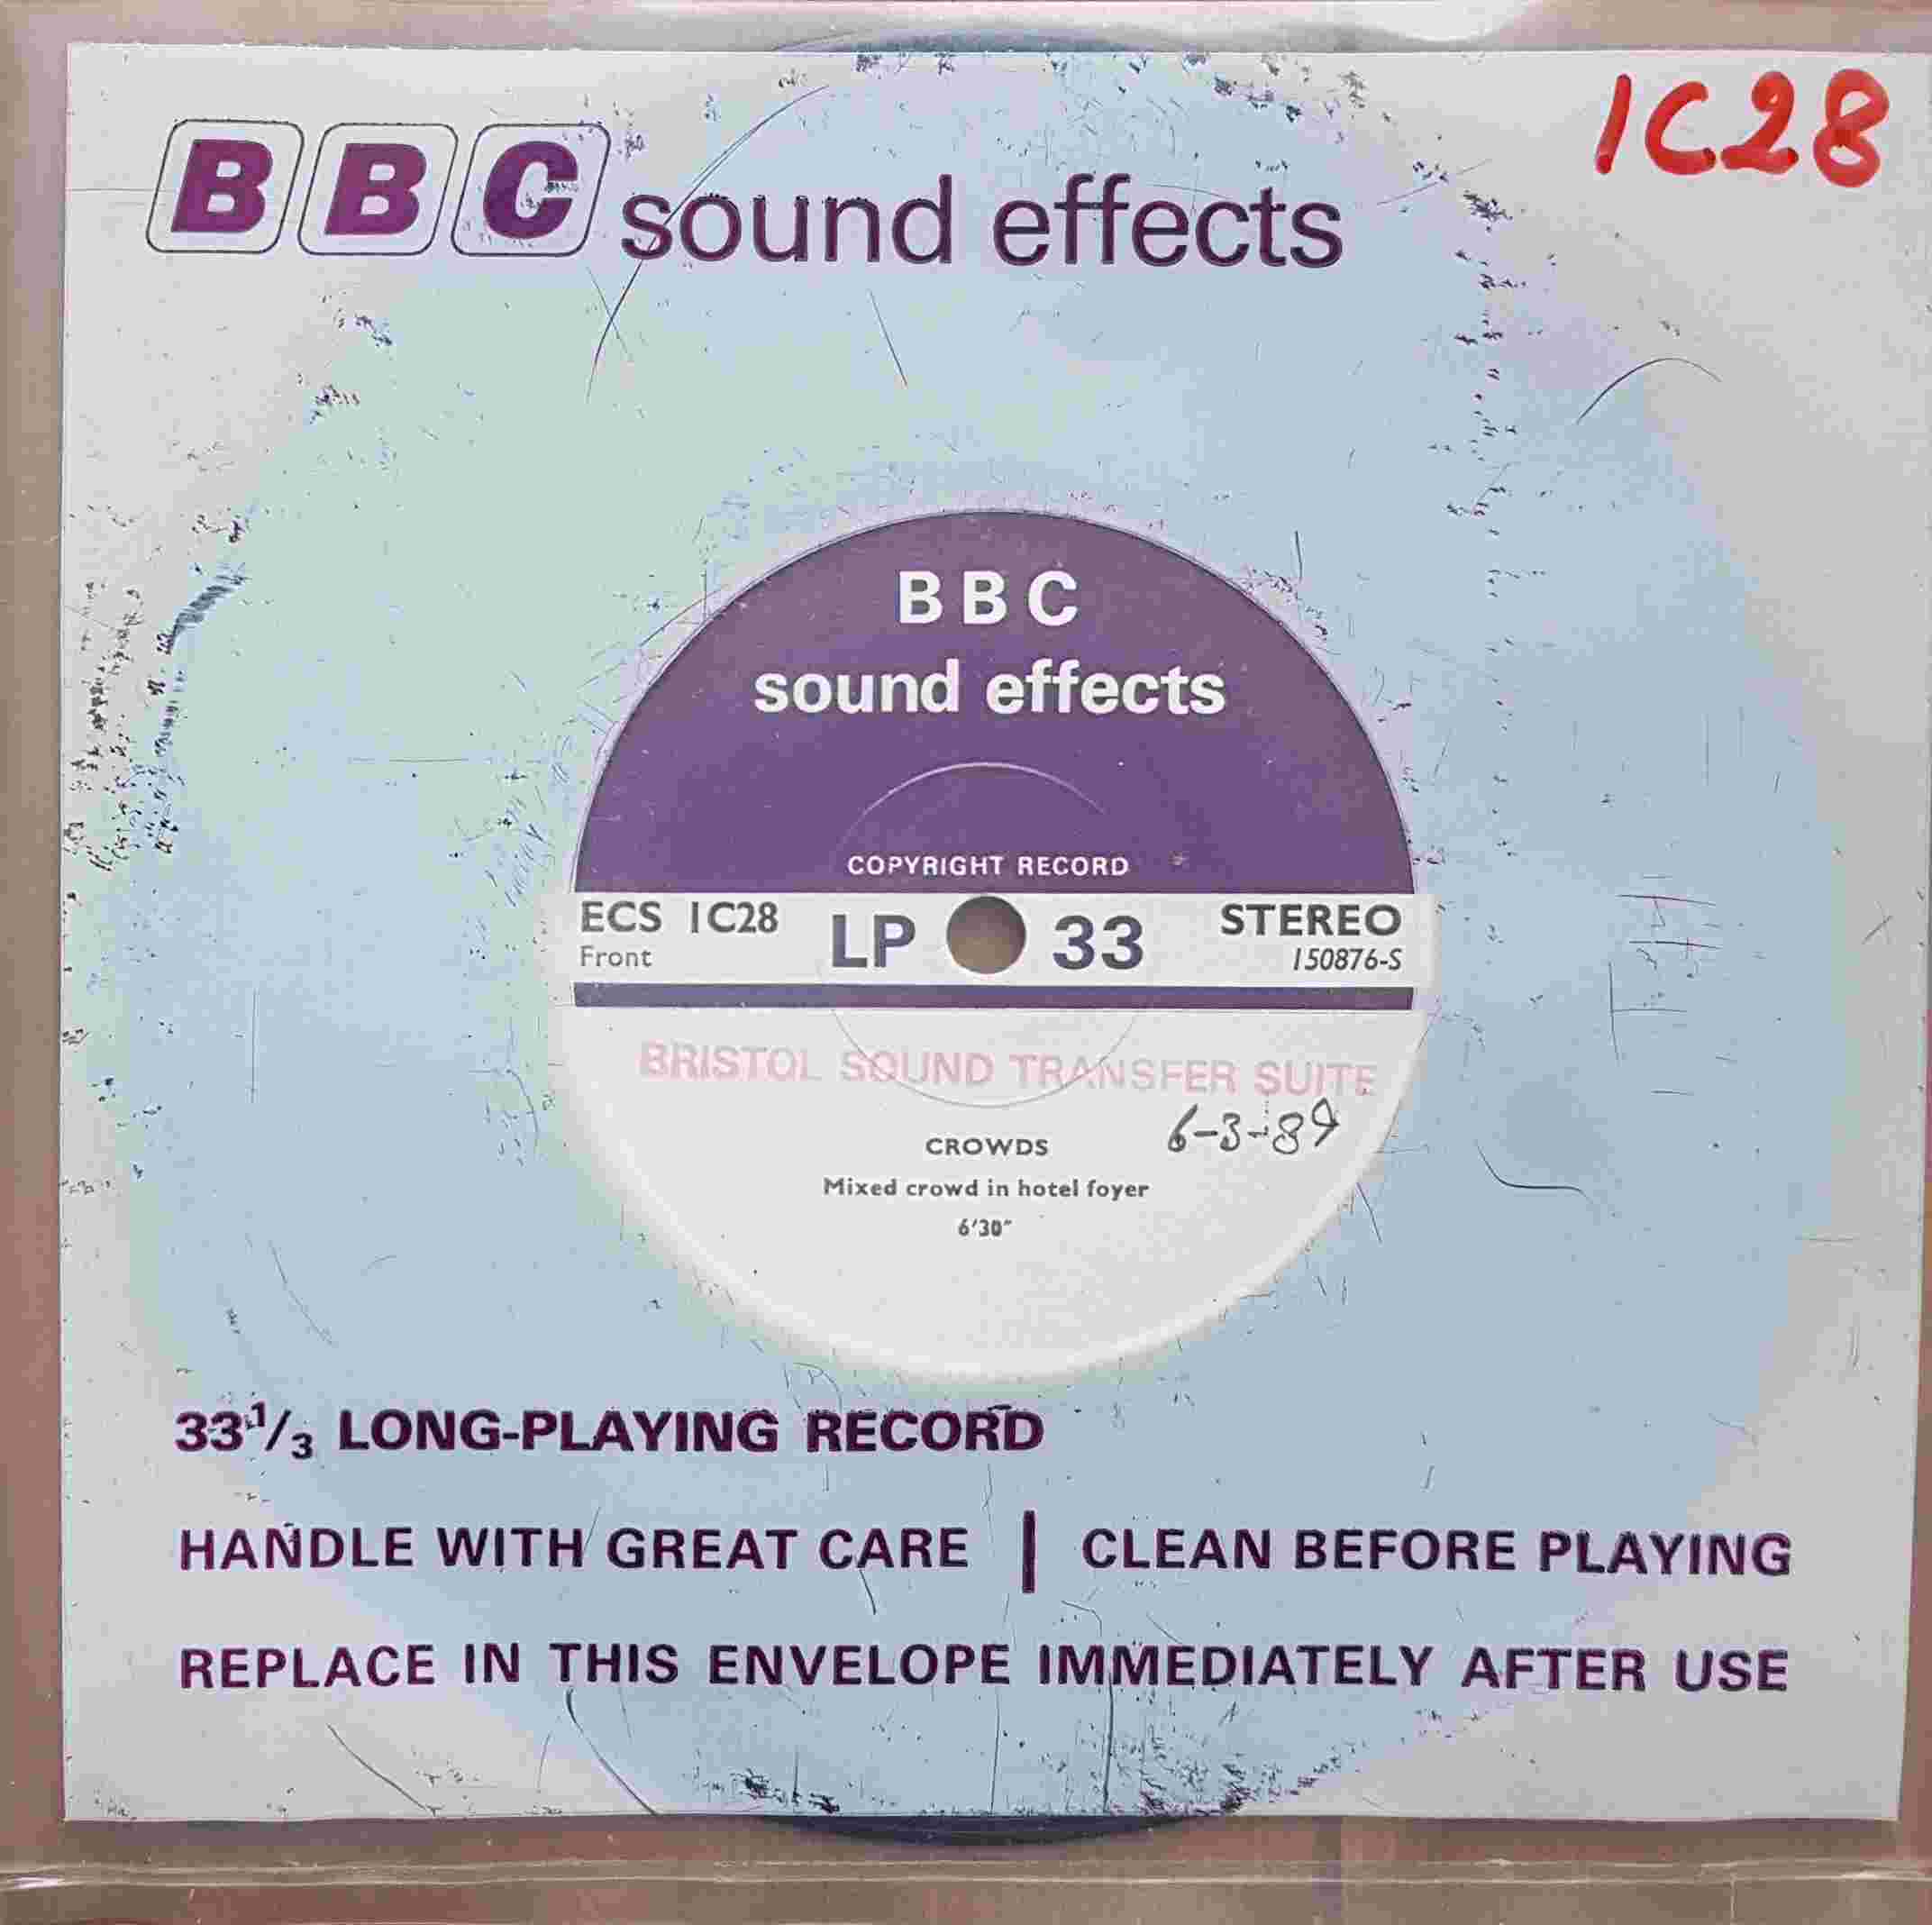 Picture of ECS 1C28 Crowds by artist Not registered from the BBC singles - Records and Tapes library